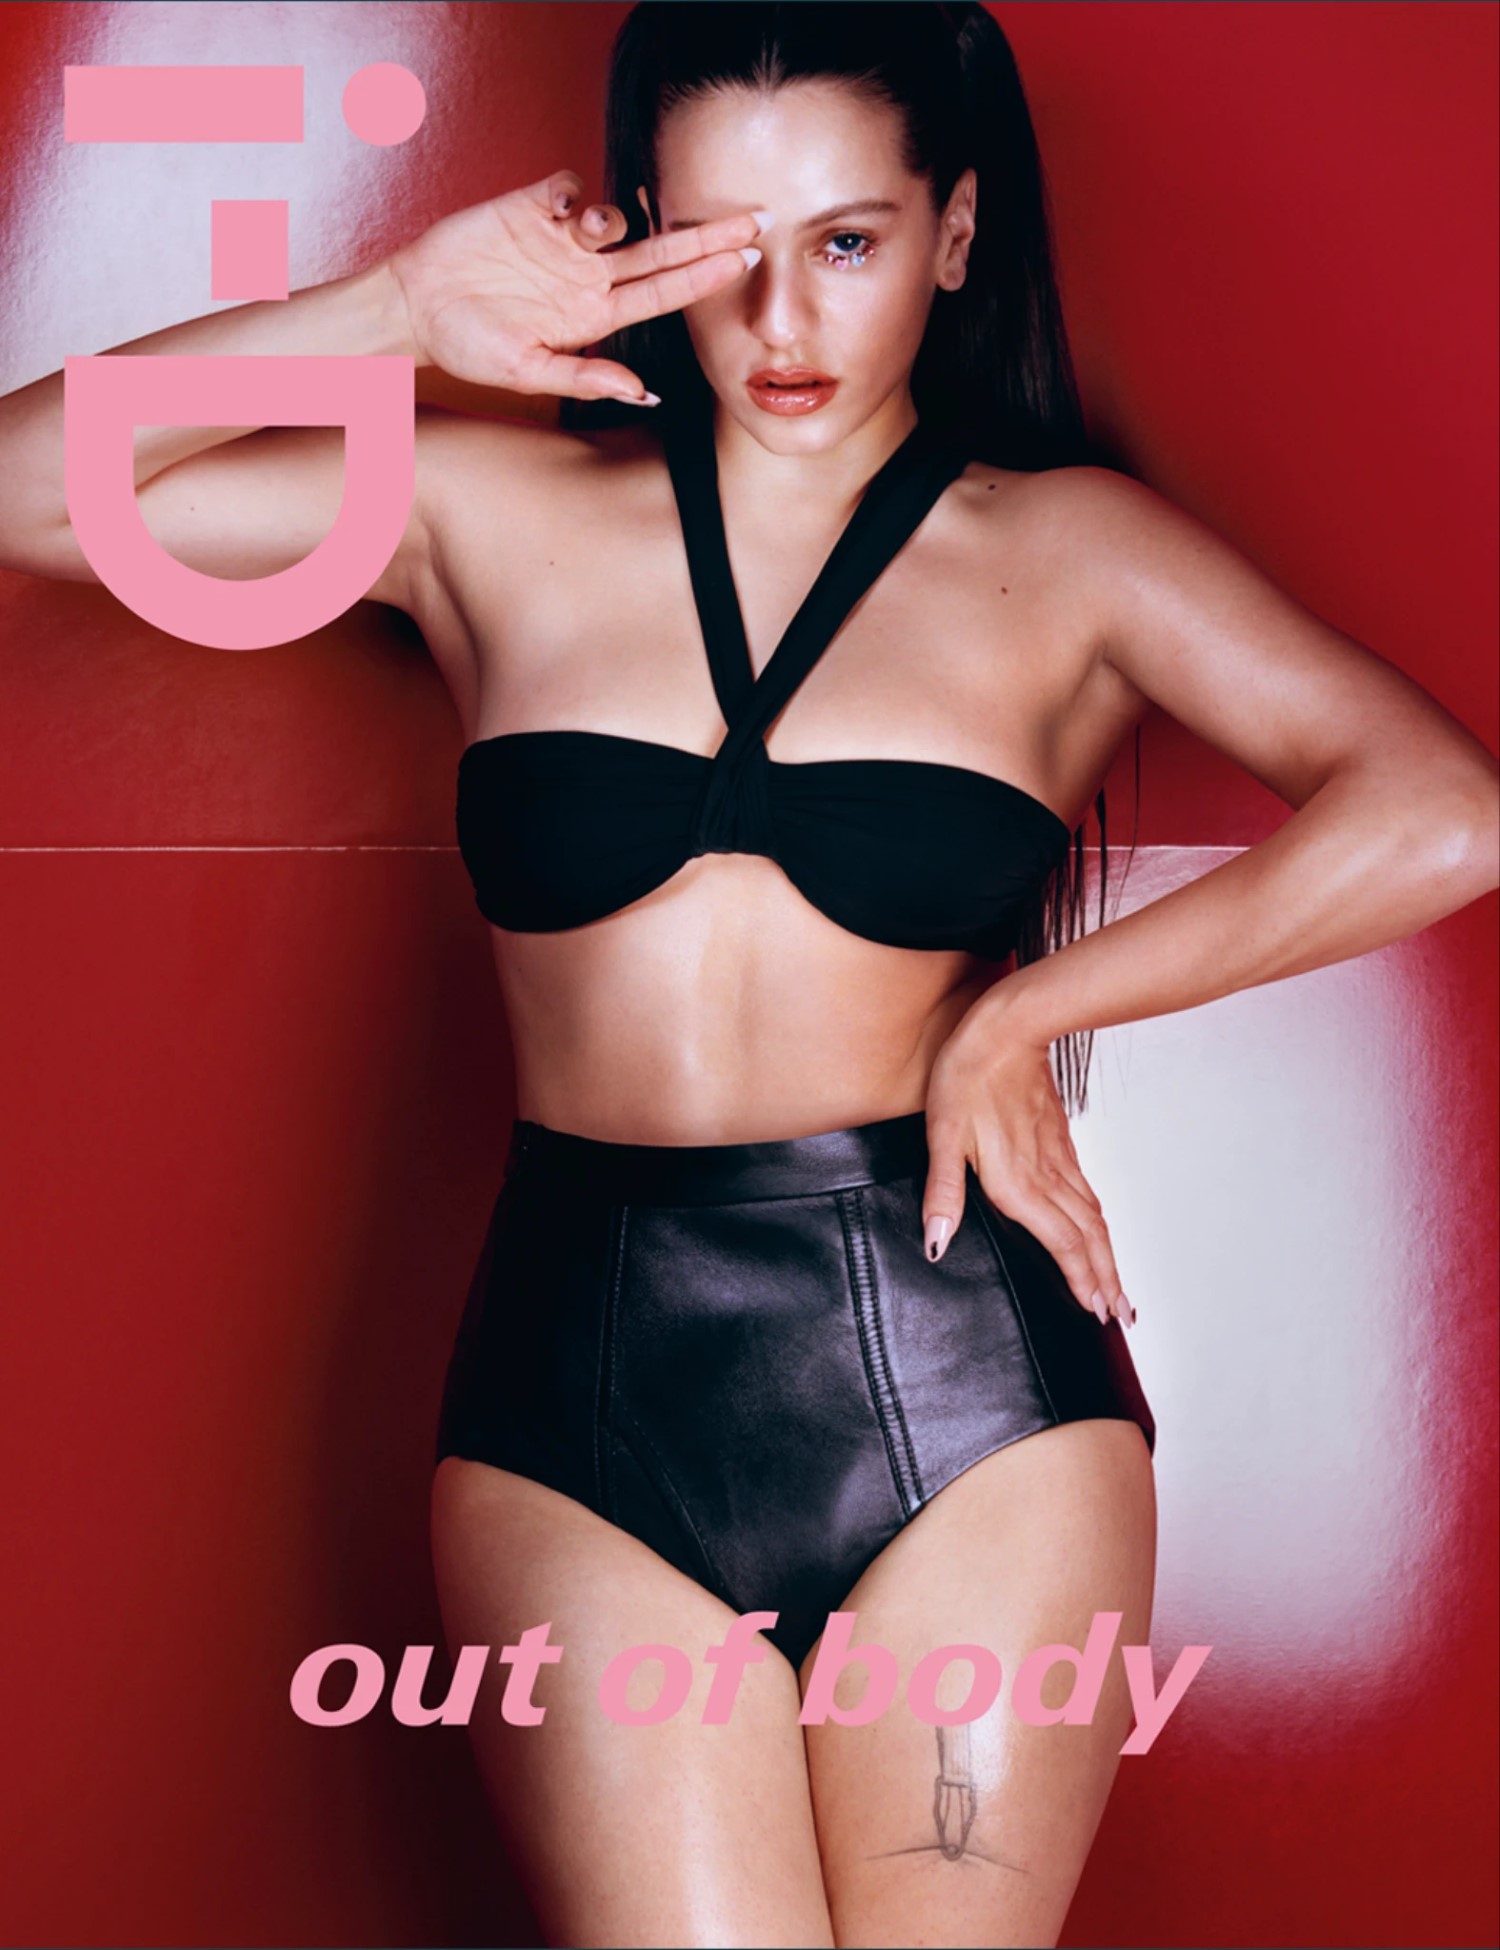 Rosalía covers i-D Magazine Issue 367 by Oliver Hadlee PearchRosalía covers i-D Magazine Issue 367 by Oliver Hadlee Pearch